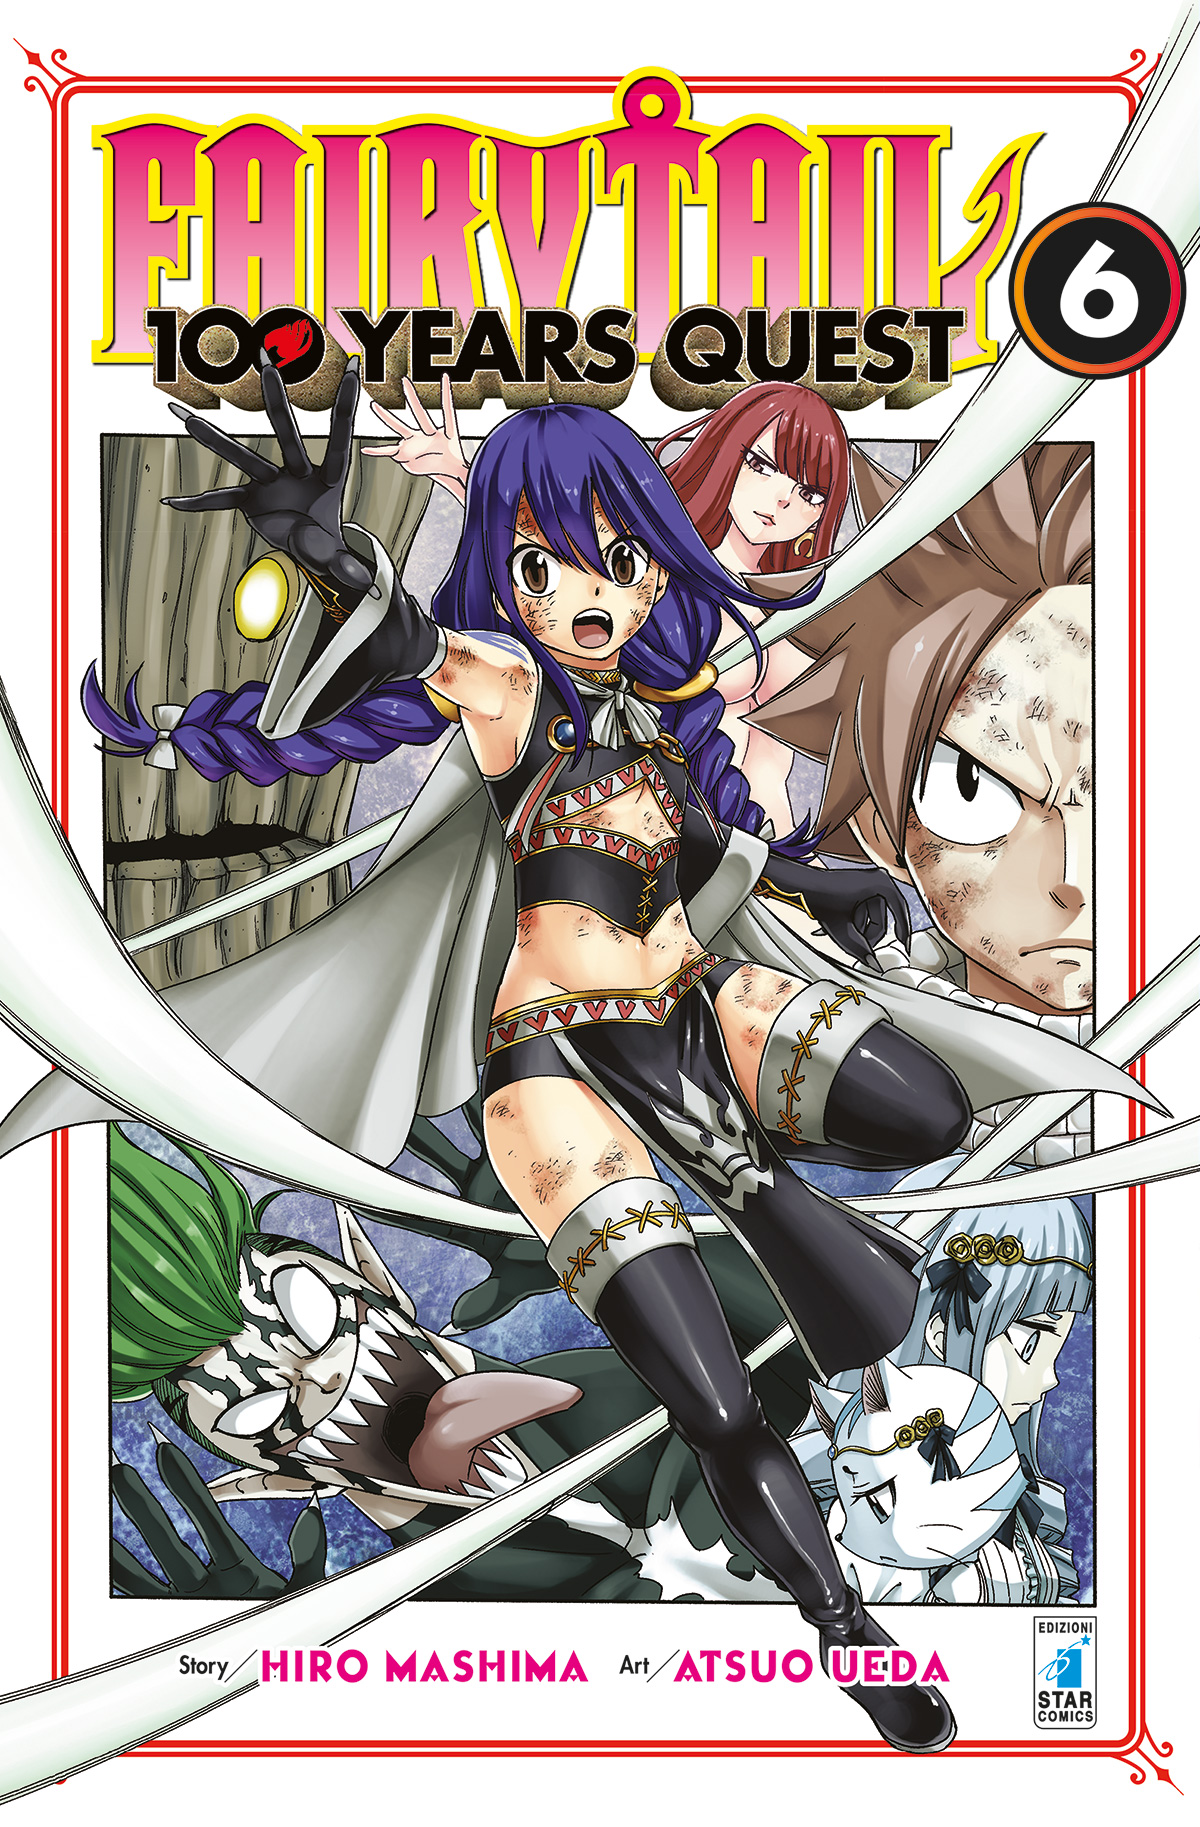 YOUNG #319 FAIRY TAIL 100 YEARS QUEST N.06